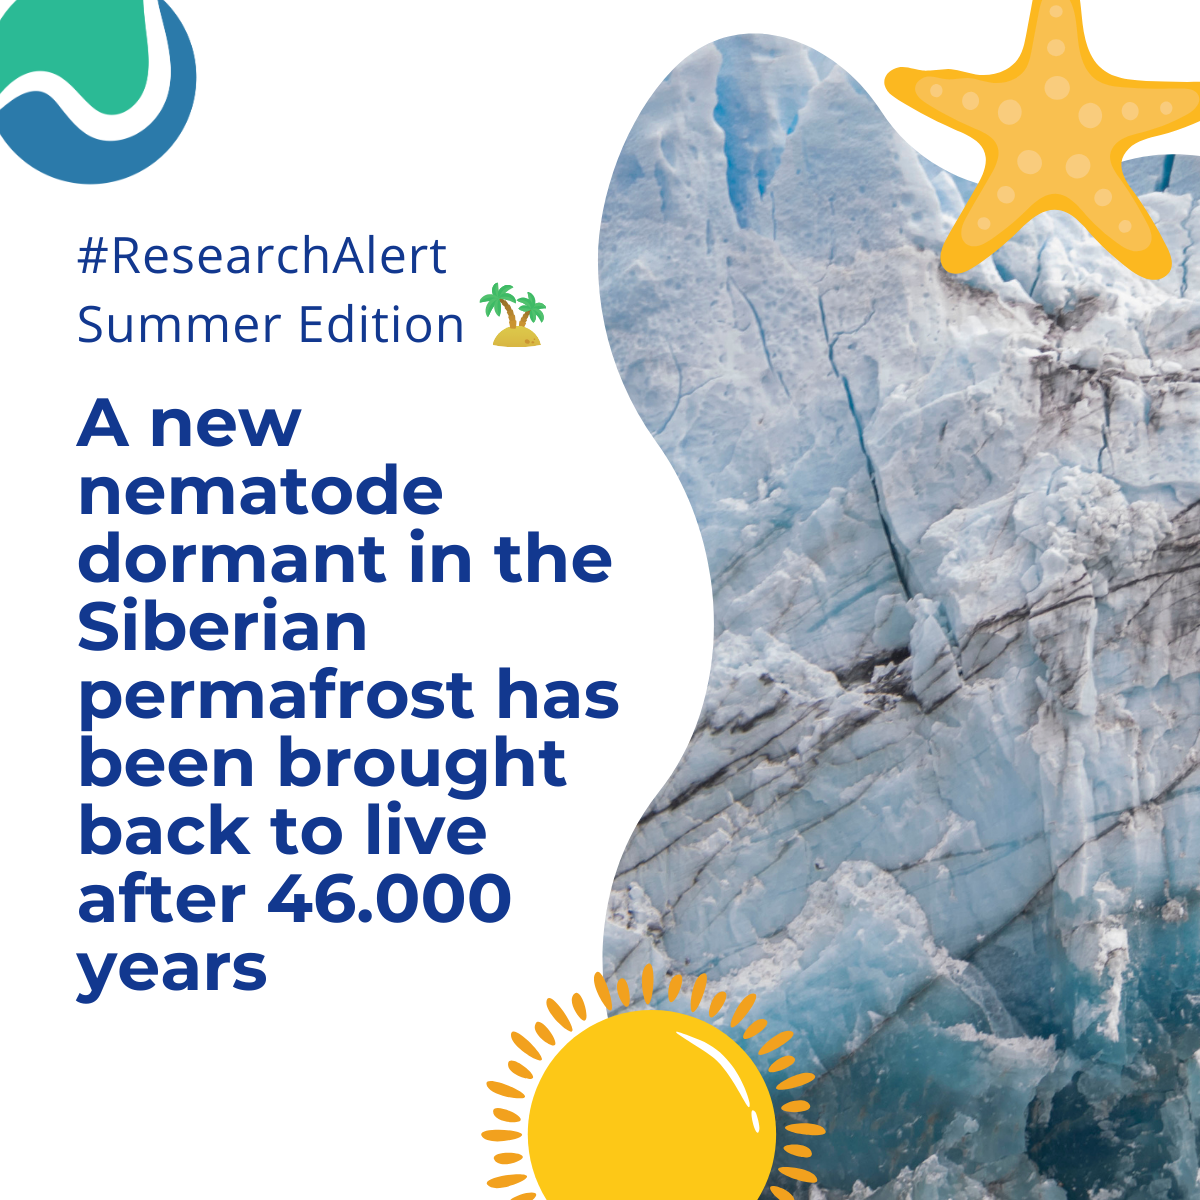 #ResearchAlert A new nematode dormant in the Siberian permafrost has been brought back to live after 46.000 years